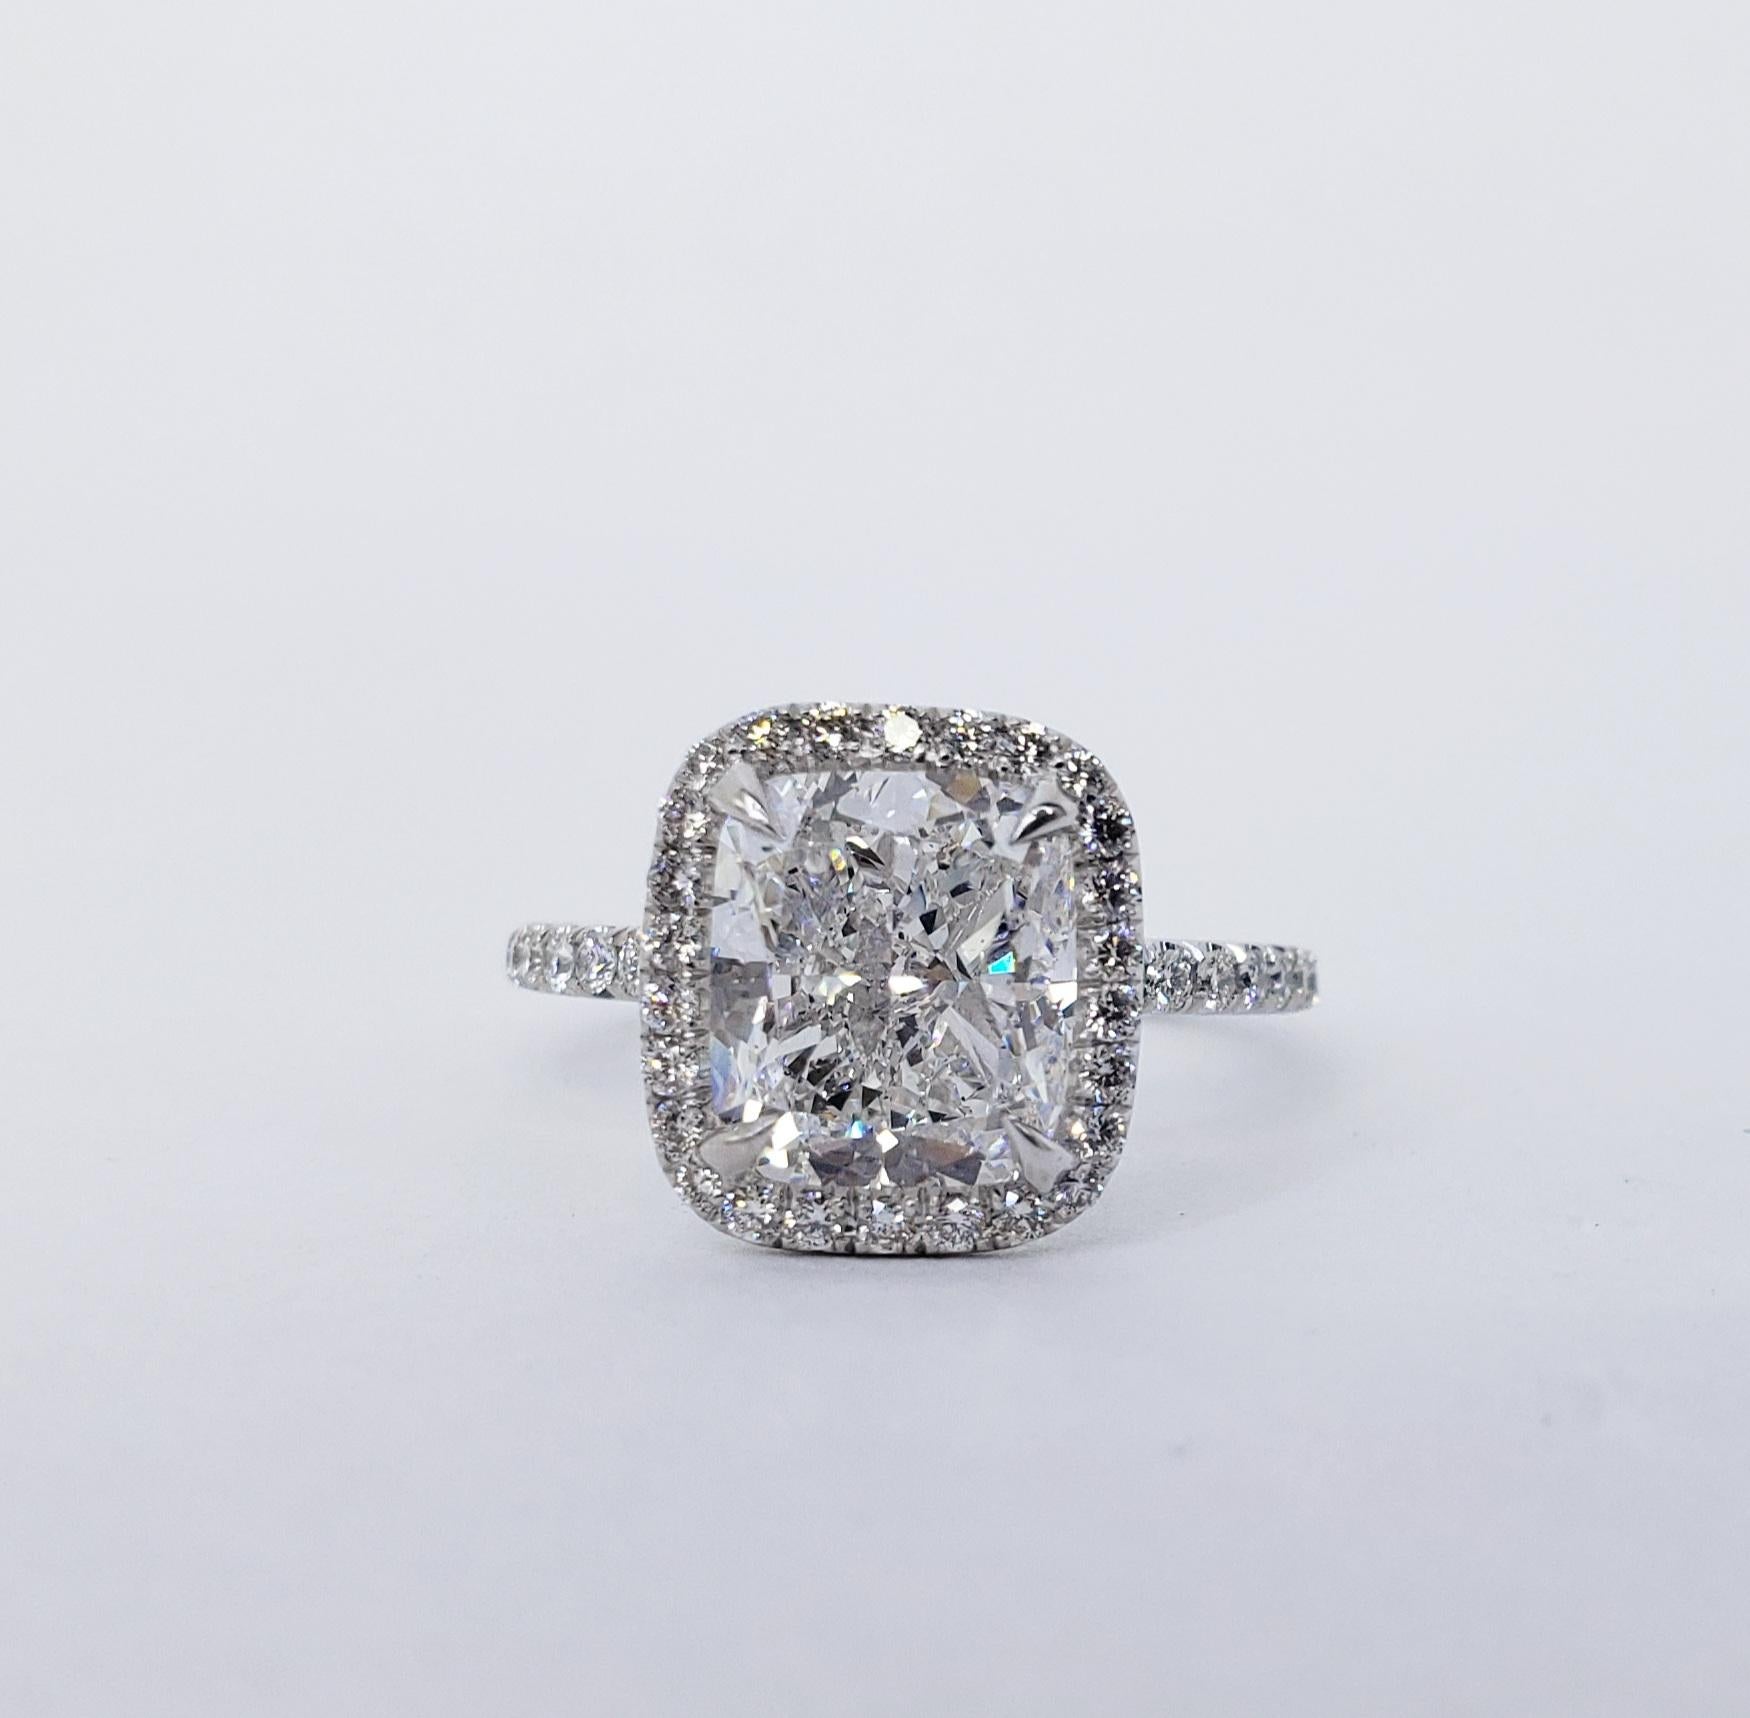 Rosenberg Diamonds & Co. 3.01 carat Cushion Cut D color VS2 clarity is accompanied by a GIA certificate. This spectacular cushion engagement ring is full of brilliance and it is set in a handmade platinum setting. This ring continues its elegance